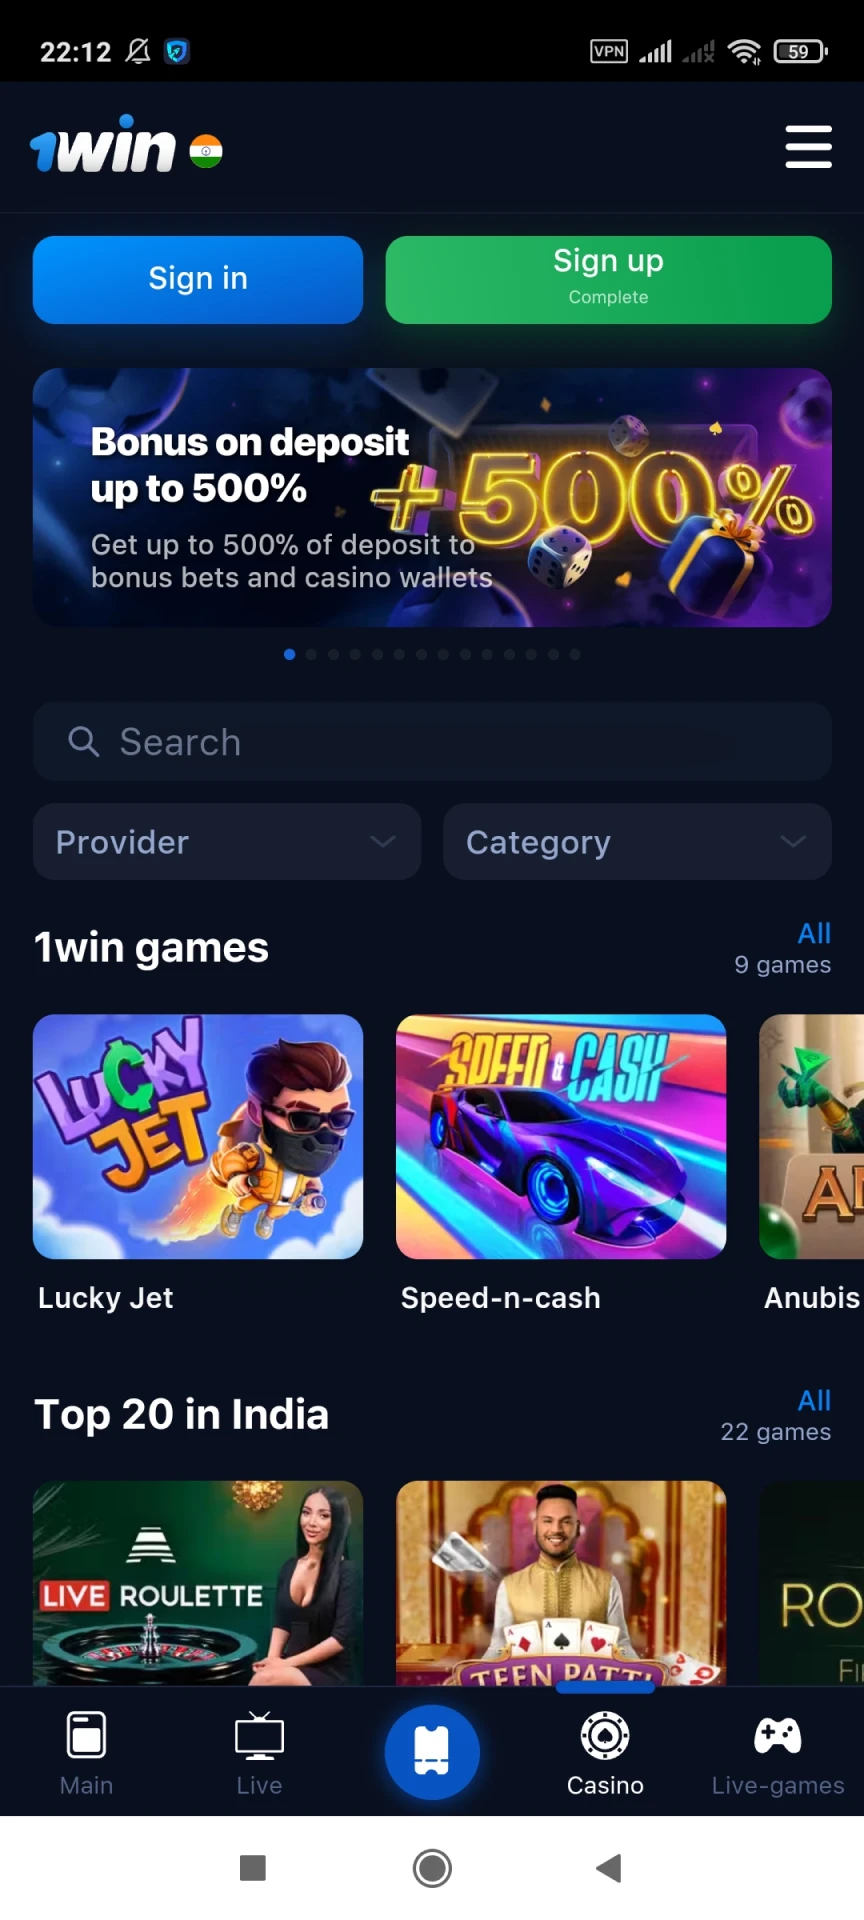 The casino games section of the 1win app.